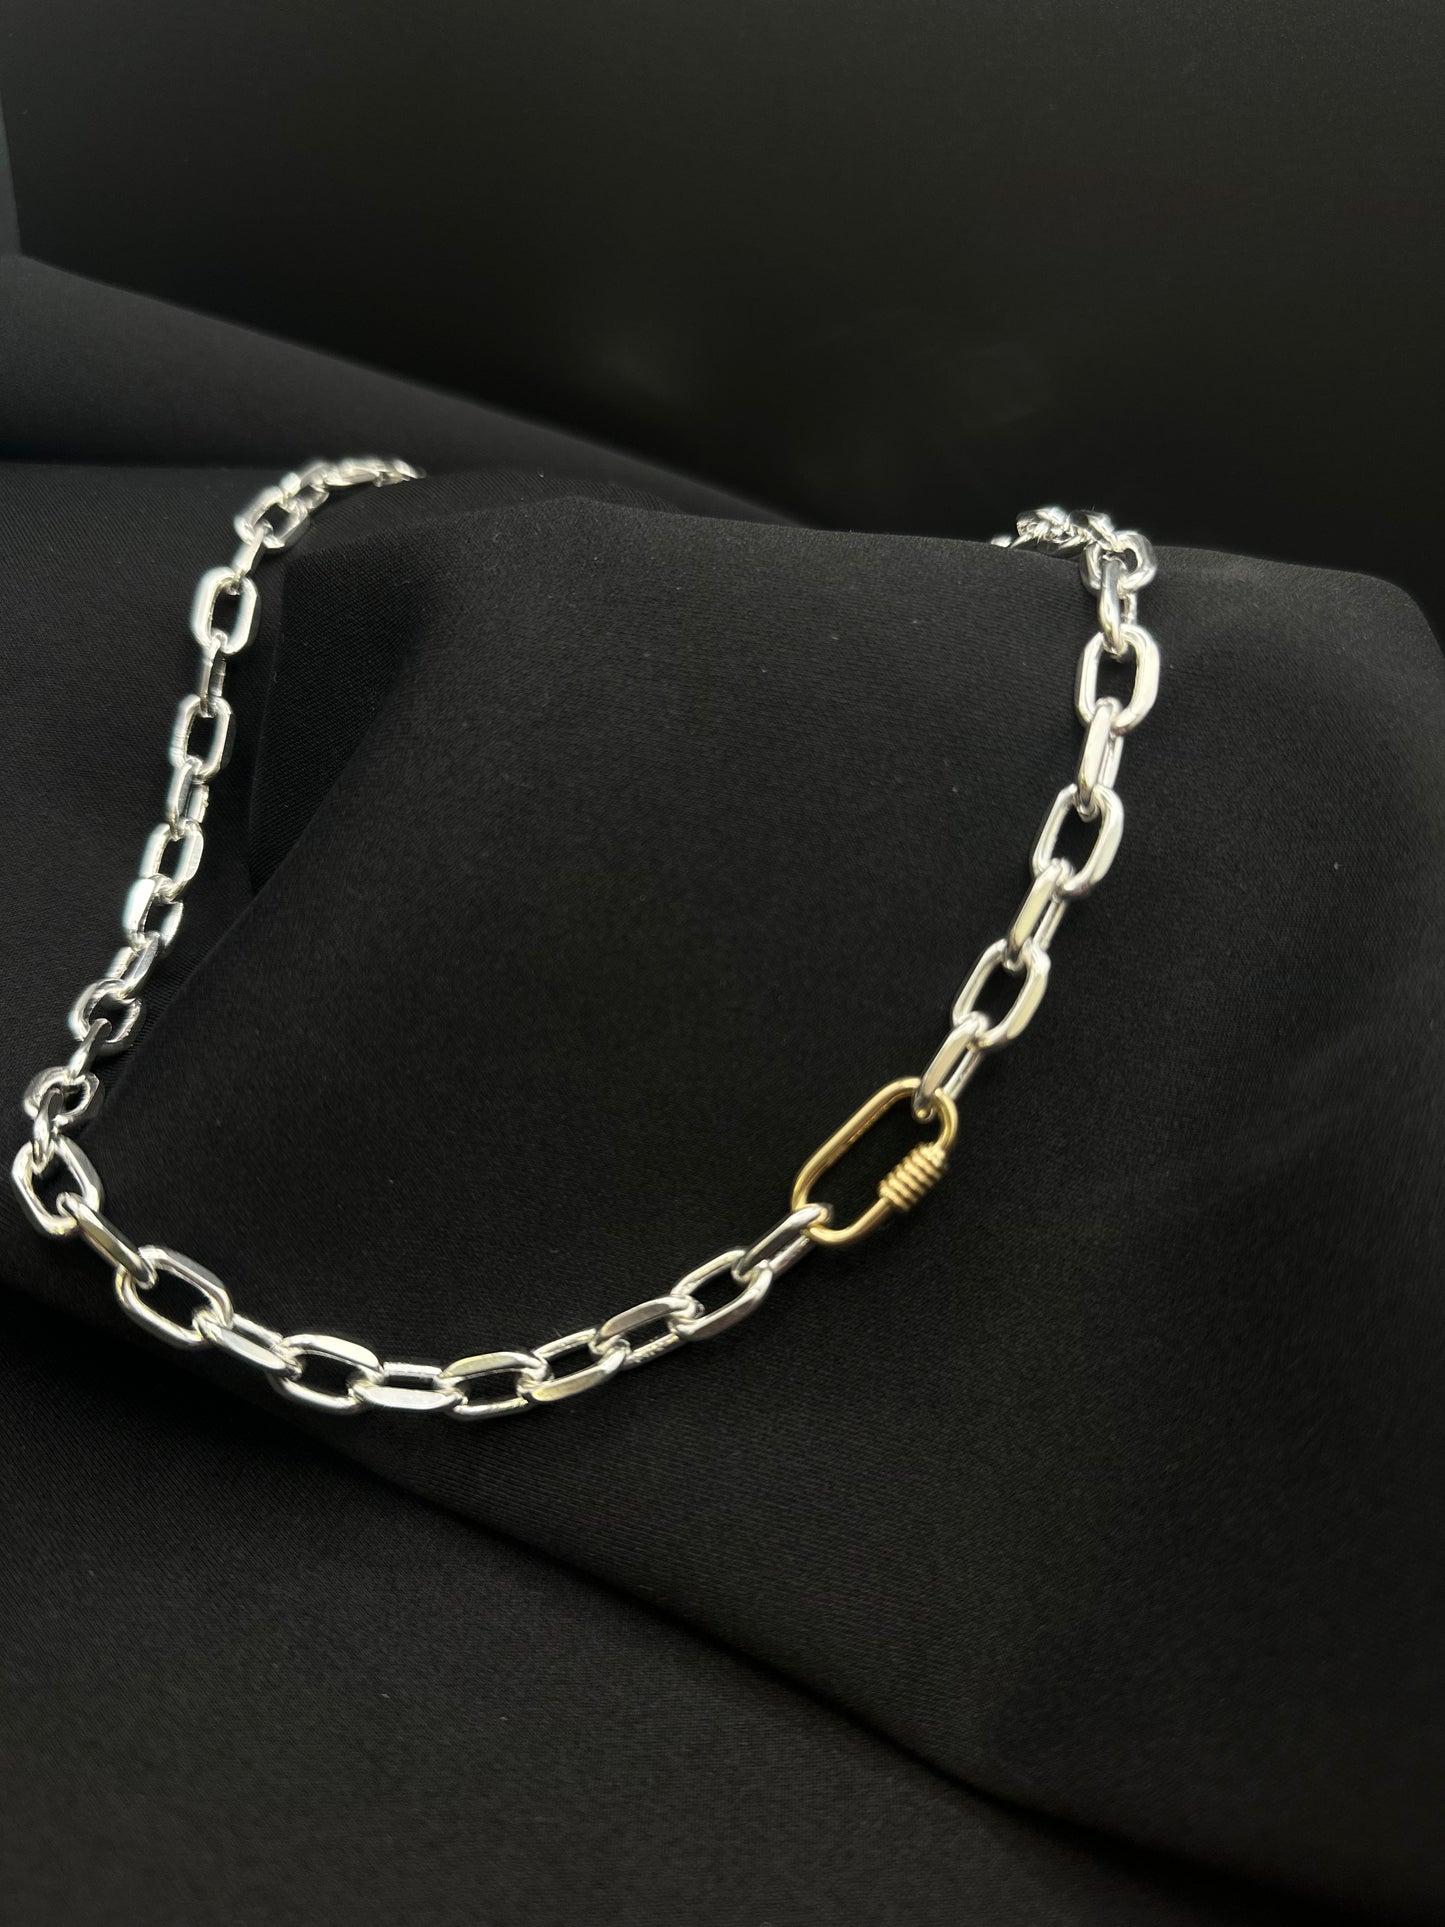 The Lock Necklace